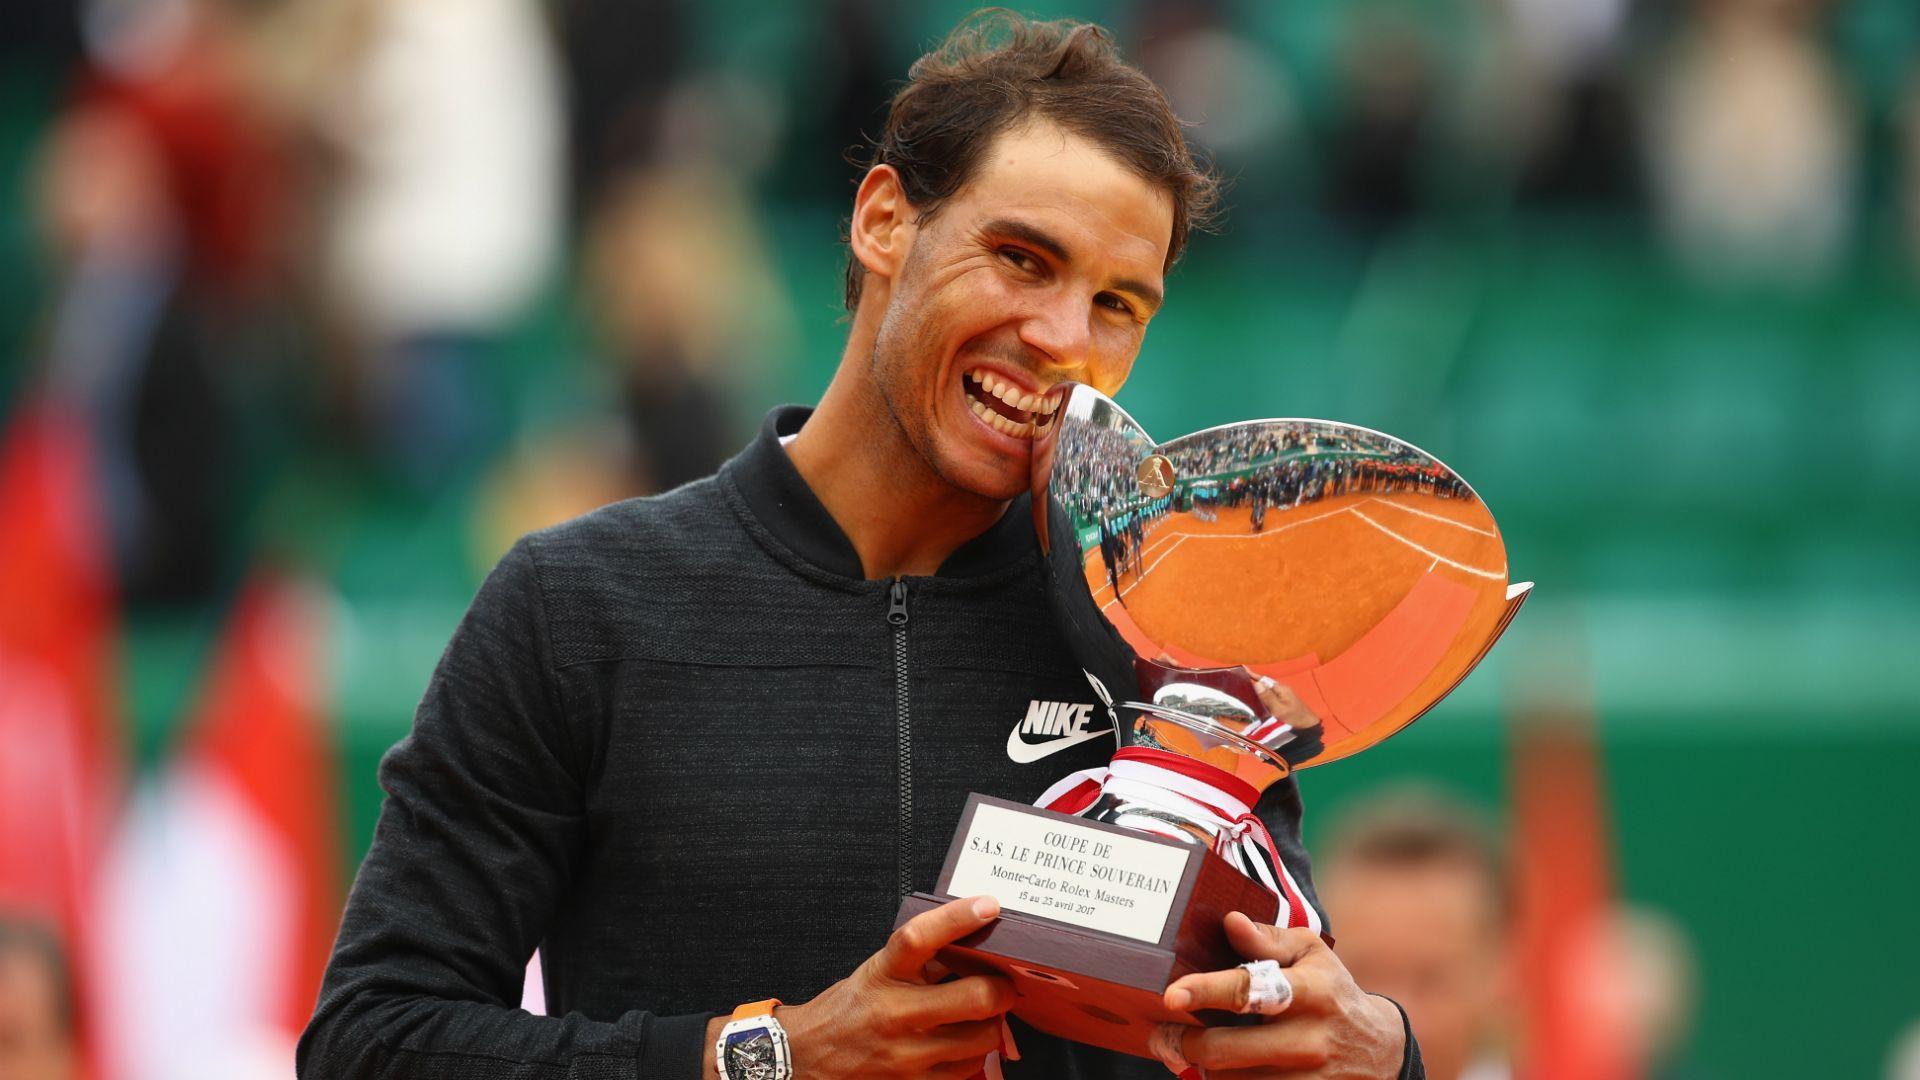 Rafael Nadal ready to crack the 10 barrier in Barcelona. Tennis